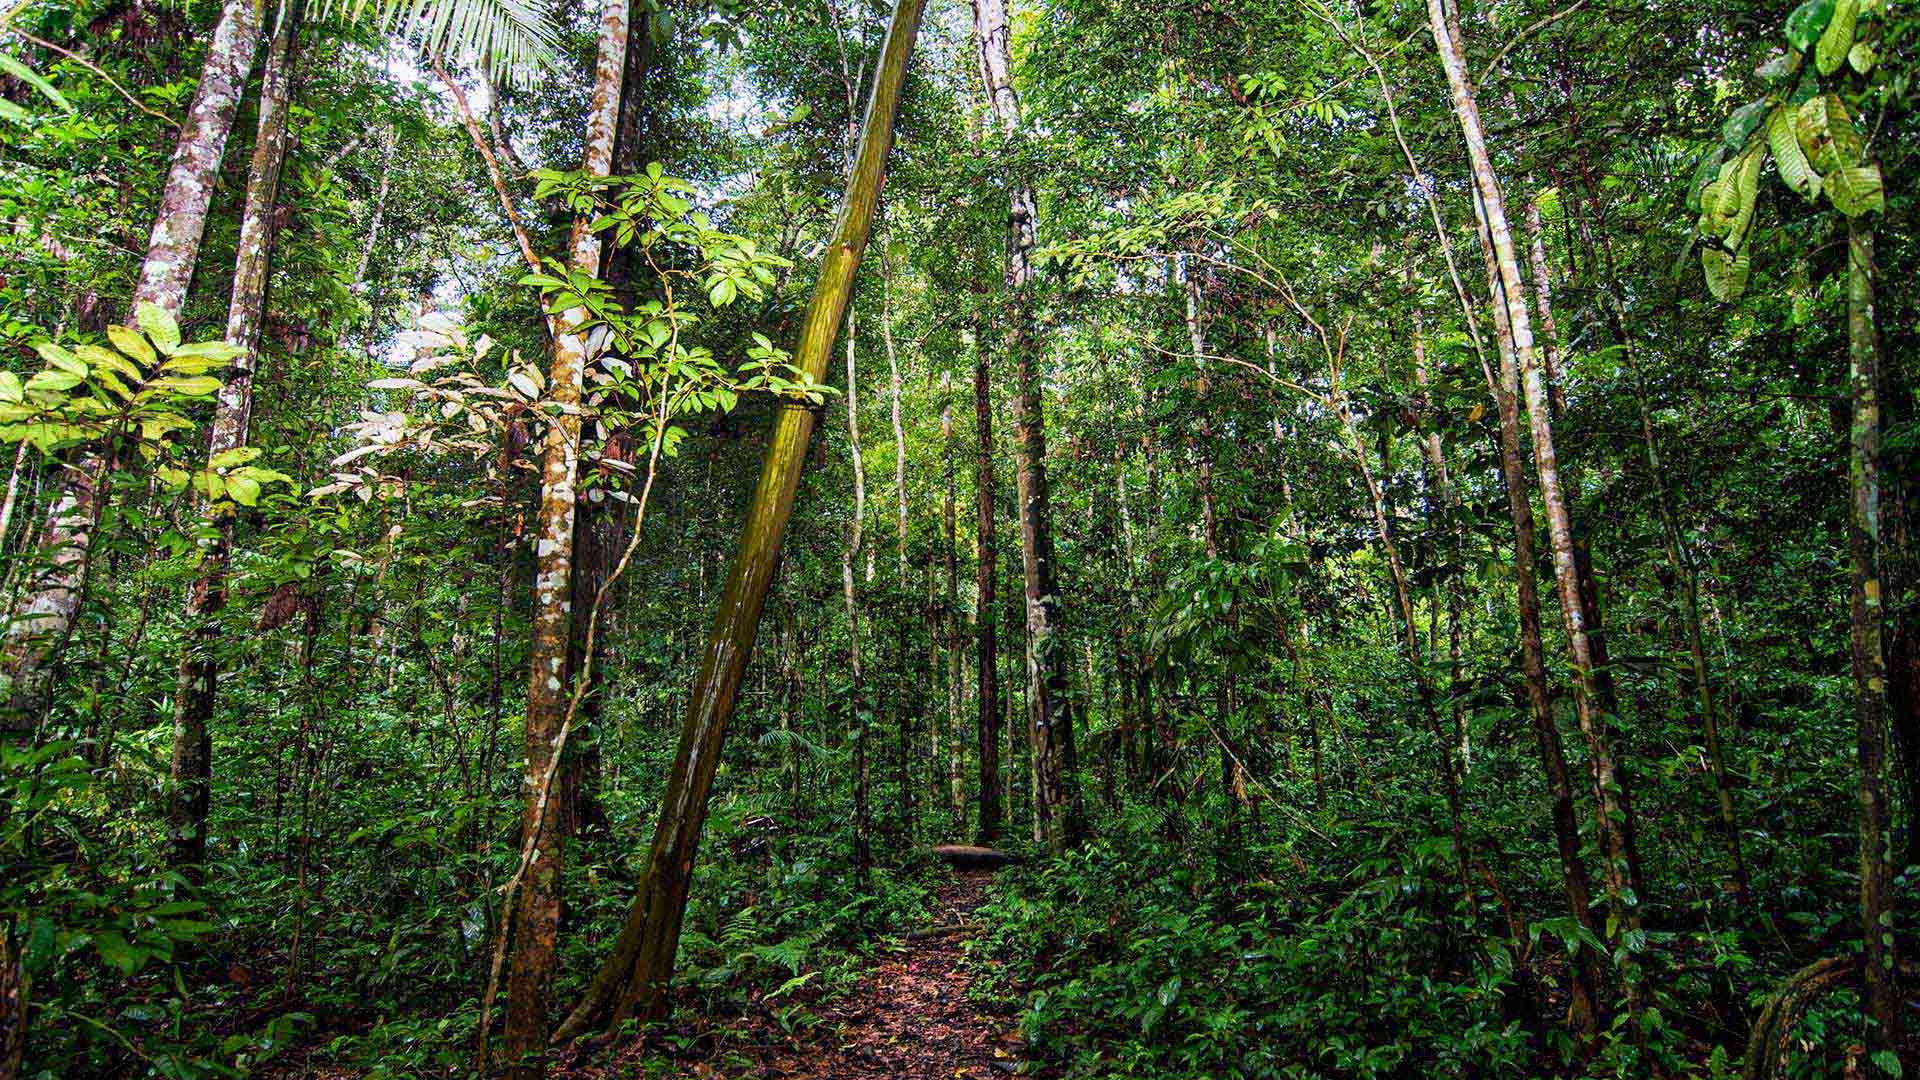 From the Ground Up: Managing our Terrestrial Ecosystems